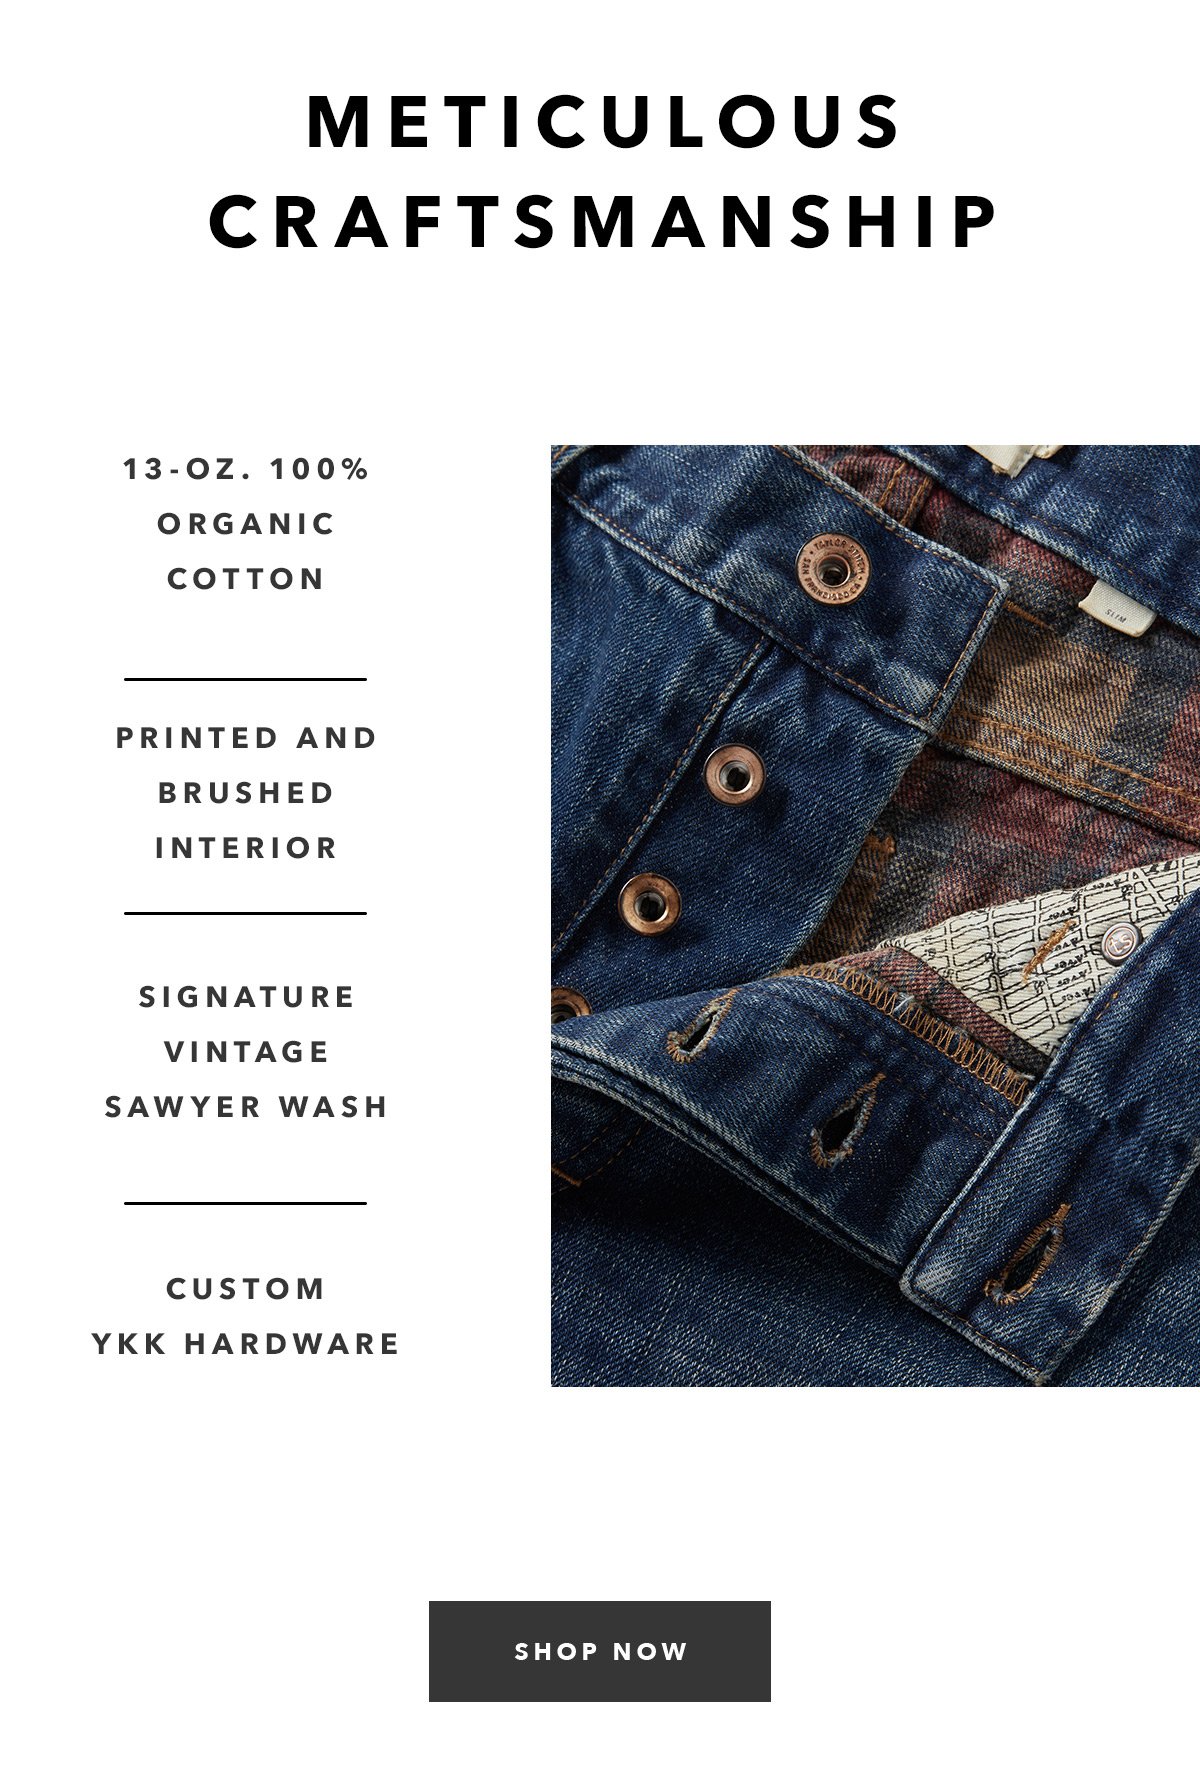 Meticulous Craftsmanship: 13-oz. 100% organic cotton. Printed and heavily brushed interior. Signature vintage Sawyer Wash. Custom developed YKK hardware to last you a lifetime.